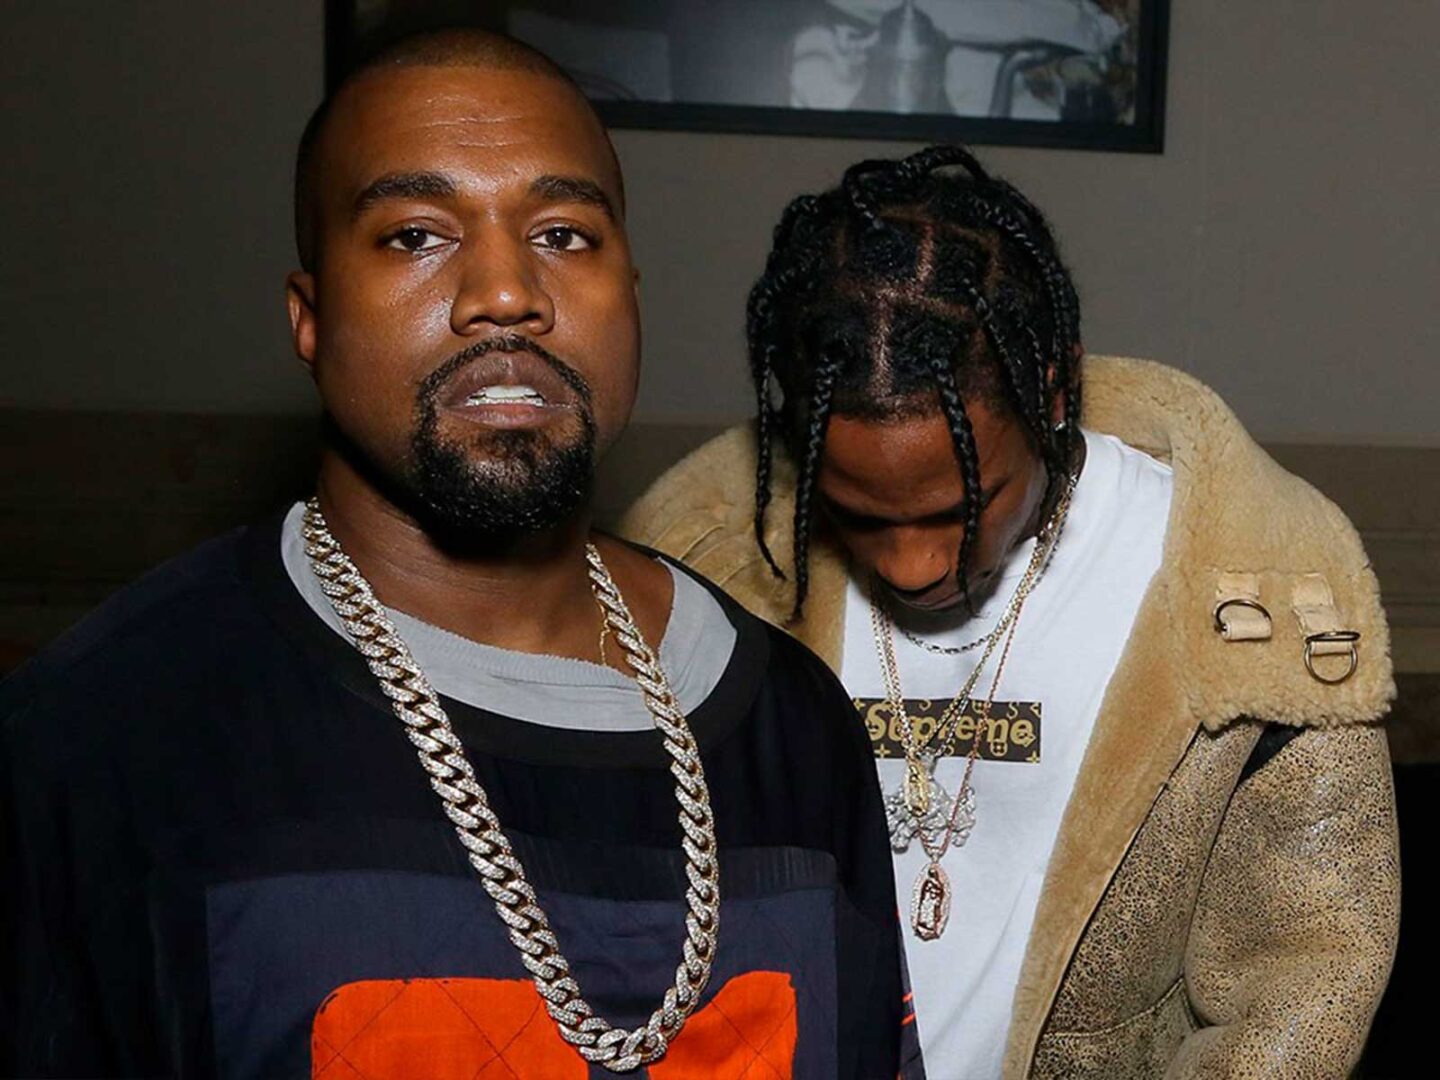 5 key aesthetic cues that Travis Scott has copied from Kanye West